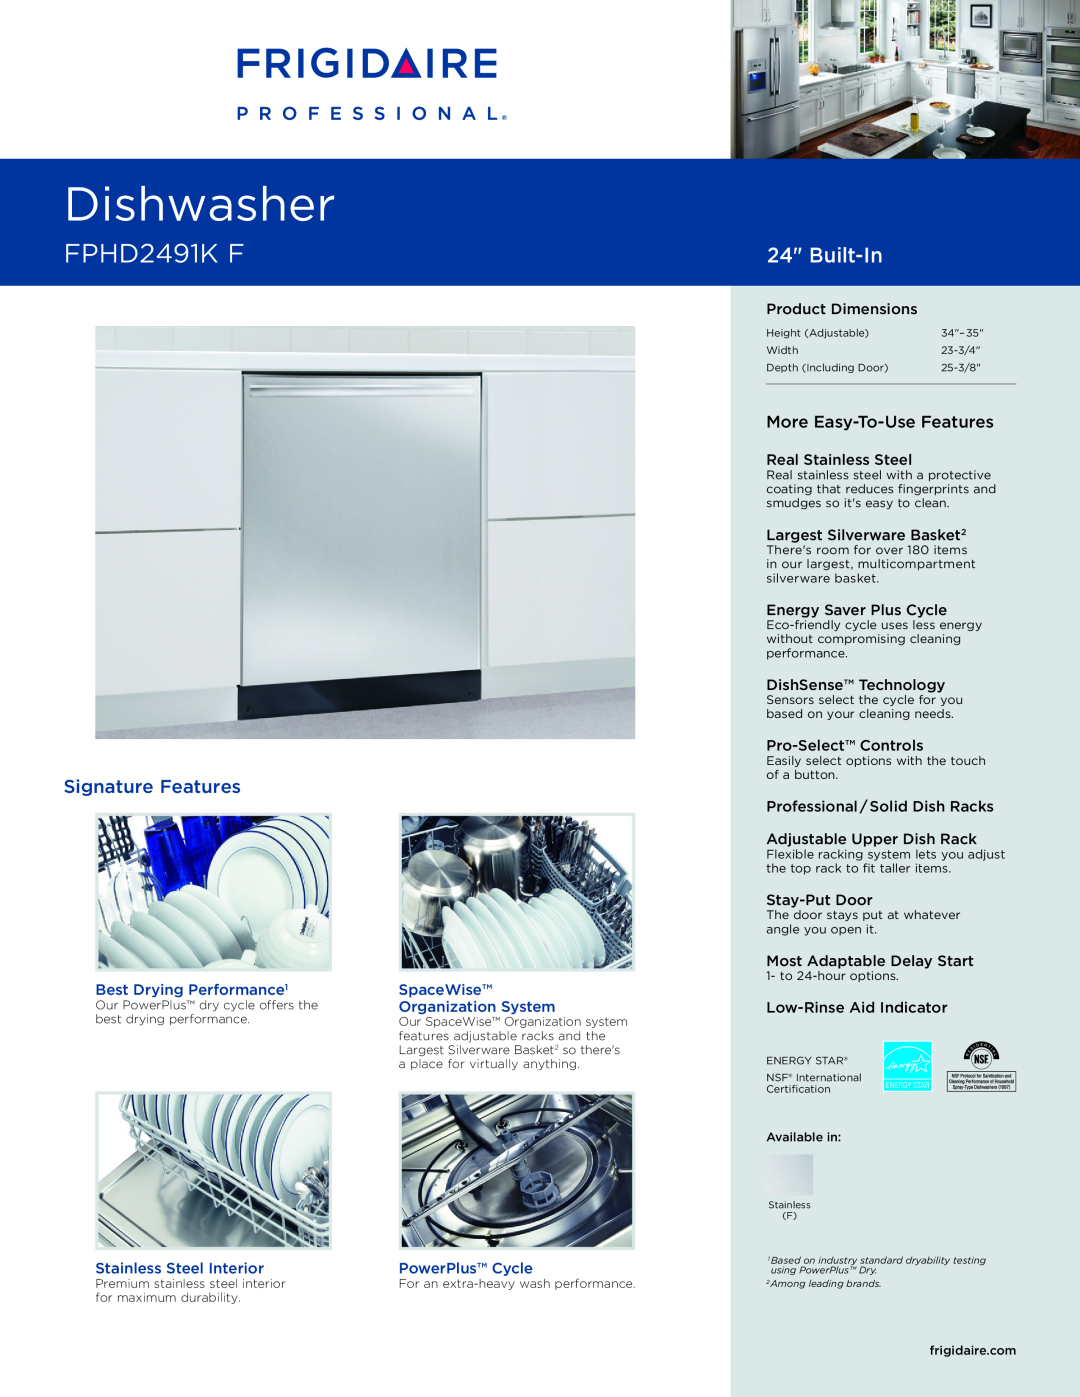 Frigidaire FPHD2491K F dimensions Dishwasher, Built-In, Signature Features, More Easy-To-Use Features, SpaceWise 